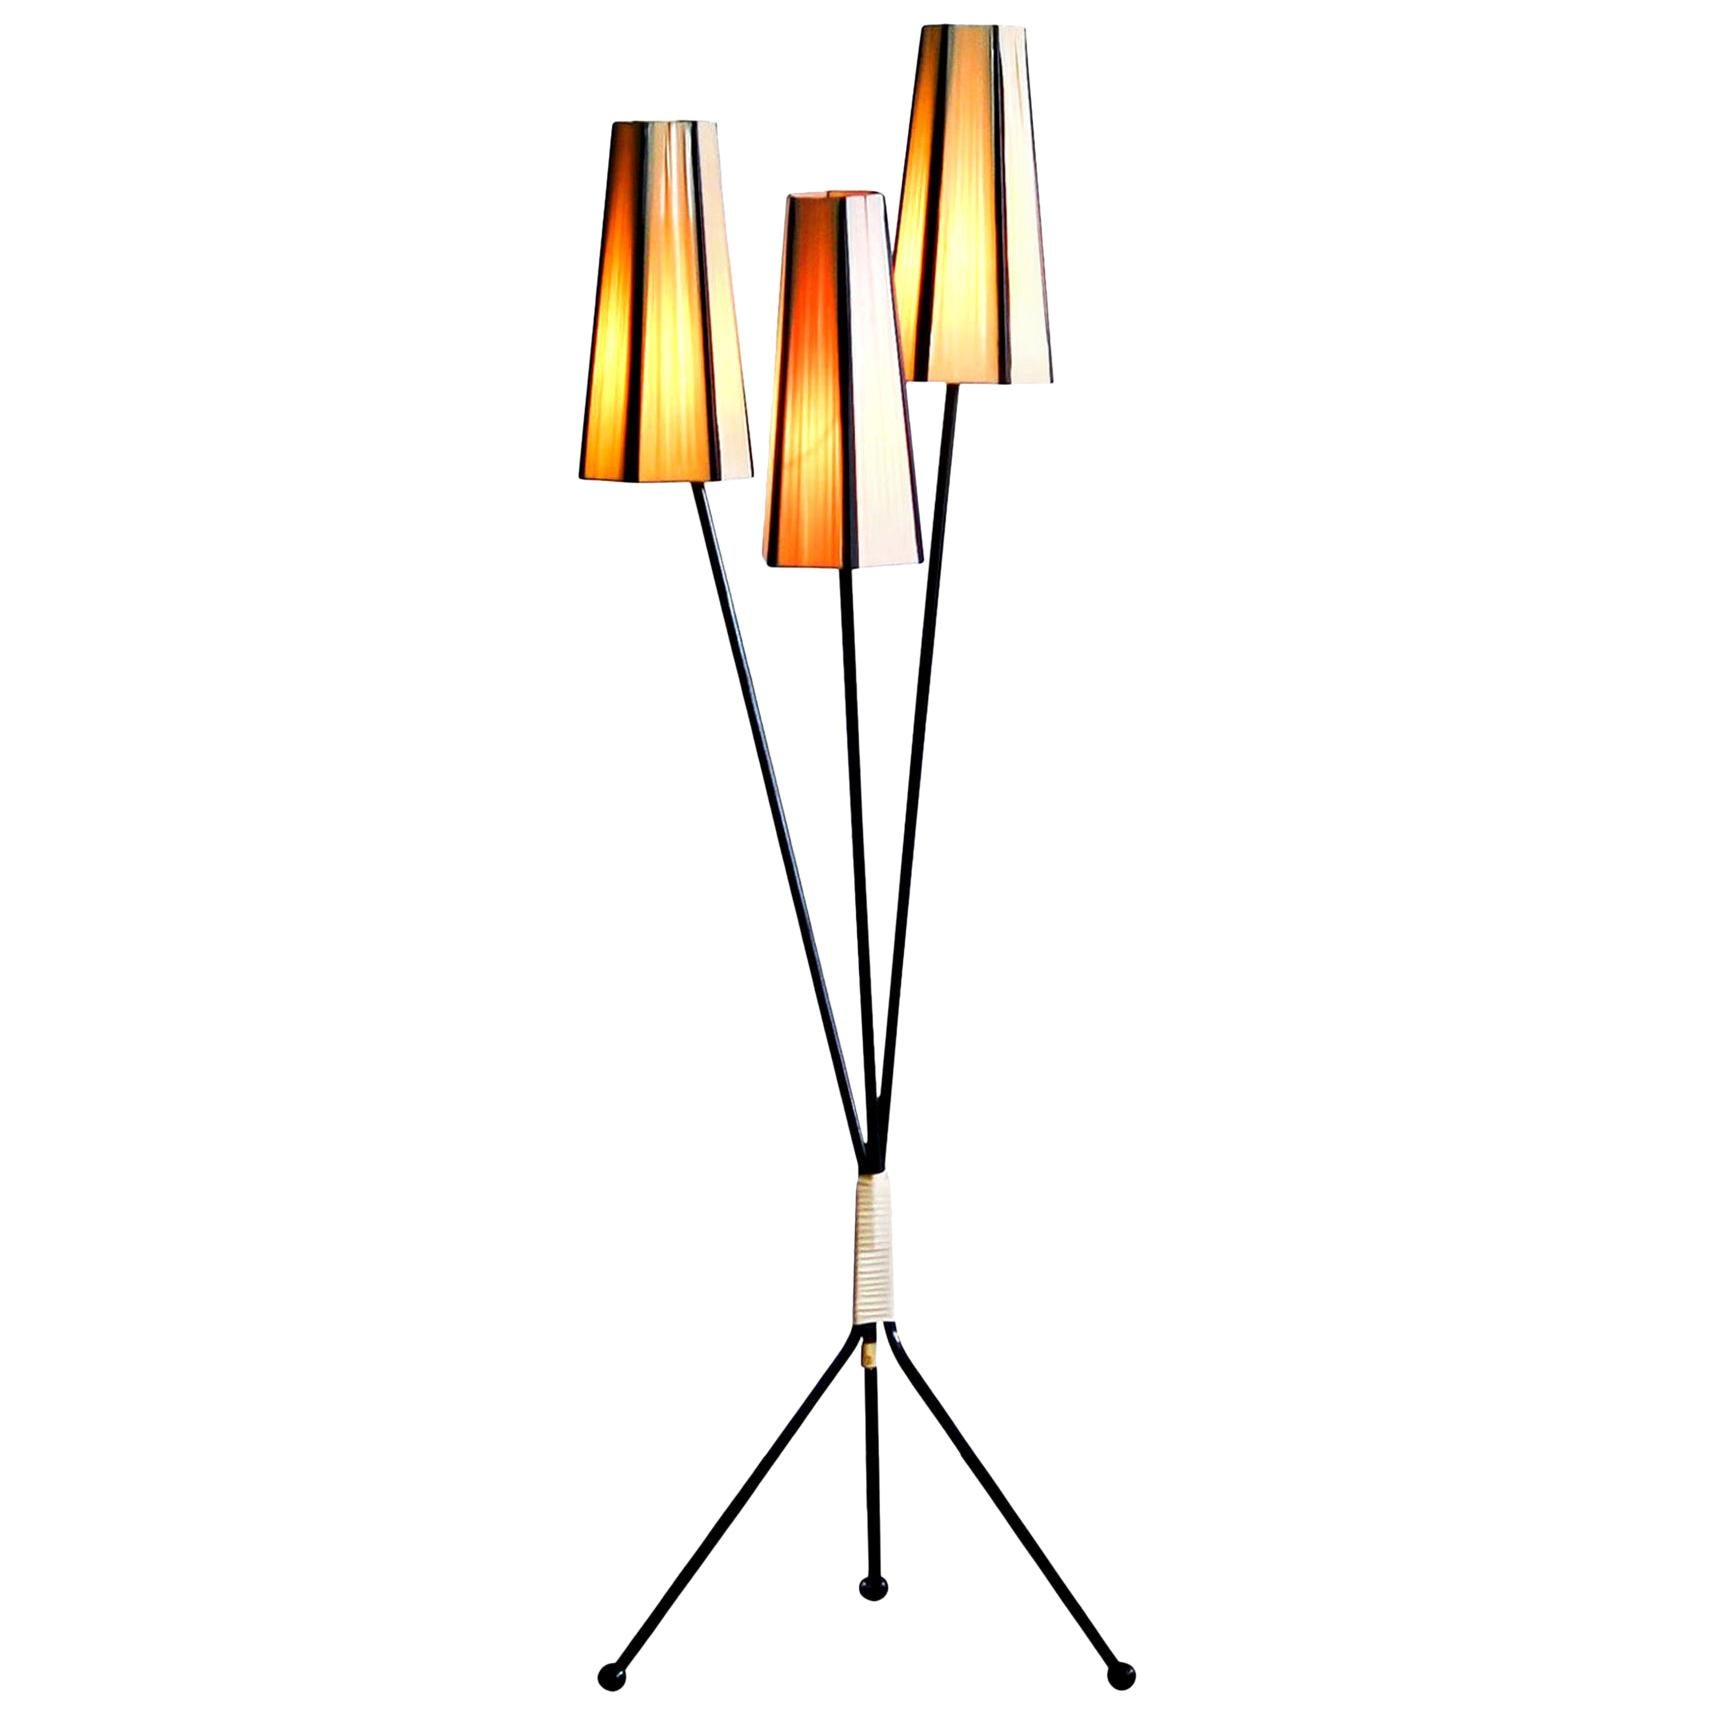 Typical 1950s floor lamp with two off-whites and one salmon polyester fabrics covers.
The caps are lined with black cords.
The lamp stands on a metal three-leg rest covered with black polyester.
The overall condition is good. Technically